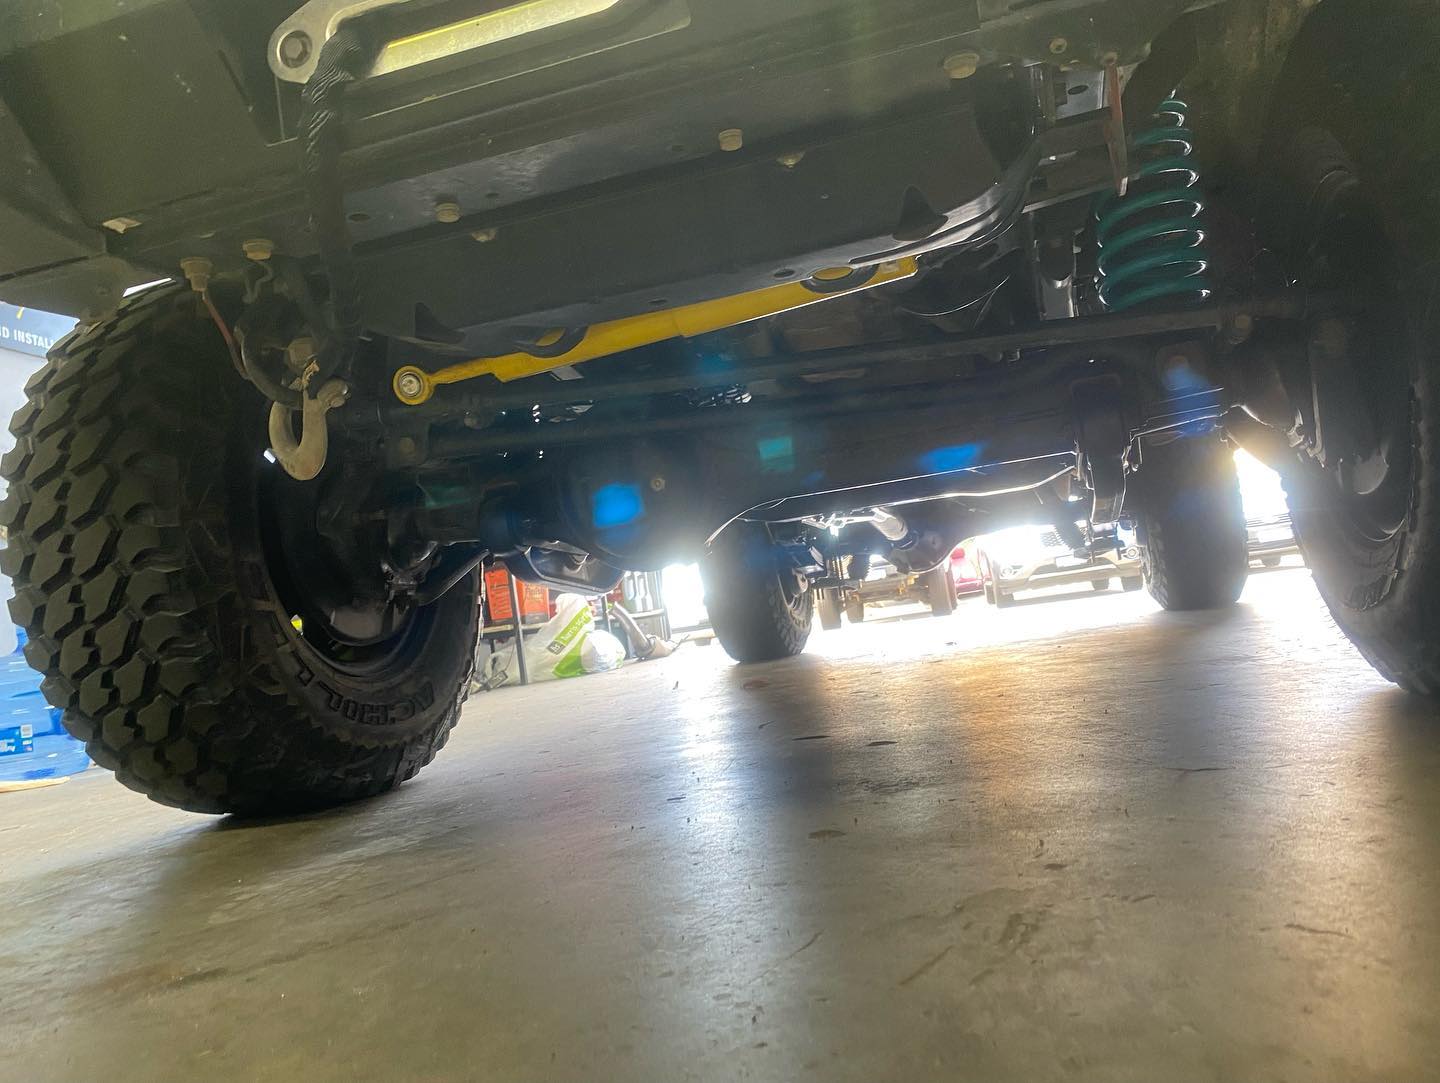 New front suspension for 4x4 | Joondalup, WA | Joondalup 4x4 & AllGas